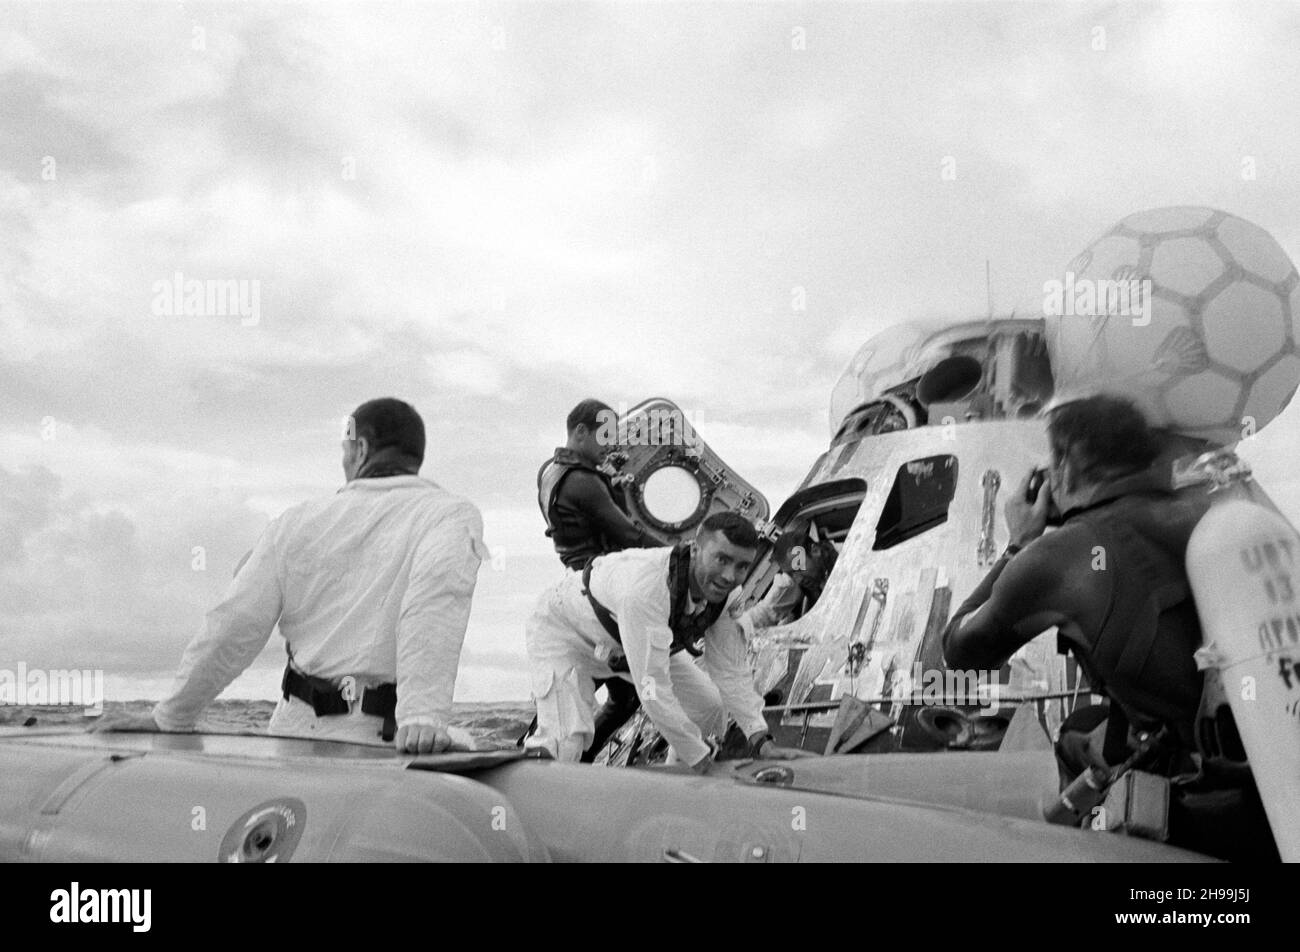 A water level view of the Apollo 13 recovery operations in the South Pacific Ocean. The three astronauts as seen egressing their spacecraft. John L. Swigert Jr. (back to camera), command module pilot, is already in the life raft. Fred W. Haise Jr., lunar module pilot, facing camera, is stepping into the life raft. James A. Lovell Jr., commander, is leaving the spacecraft in the background. A United States Navy underwater demolition team assists with the recovery operations. The three crewmembers were picked up by helicopter and flown to the prime recovery ship, USS Iwo Jima Stock Photo